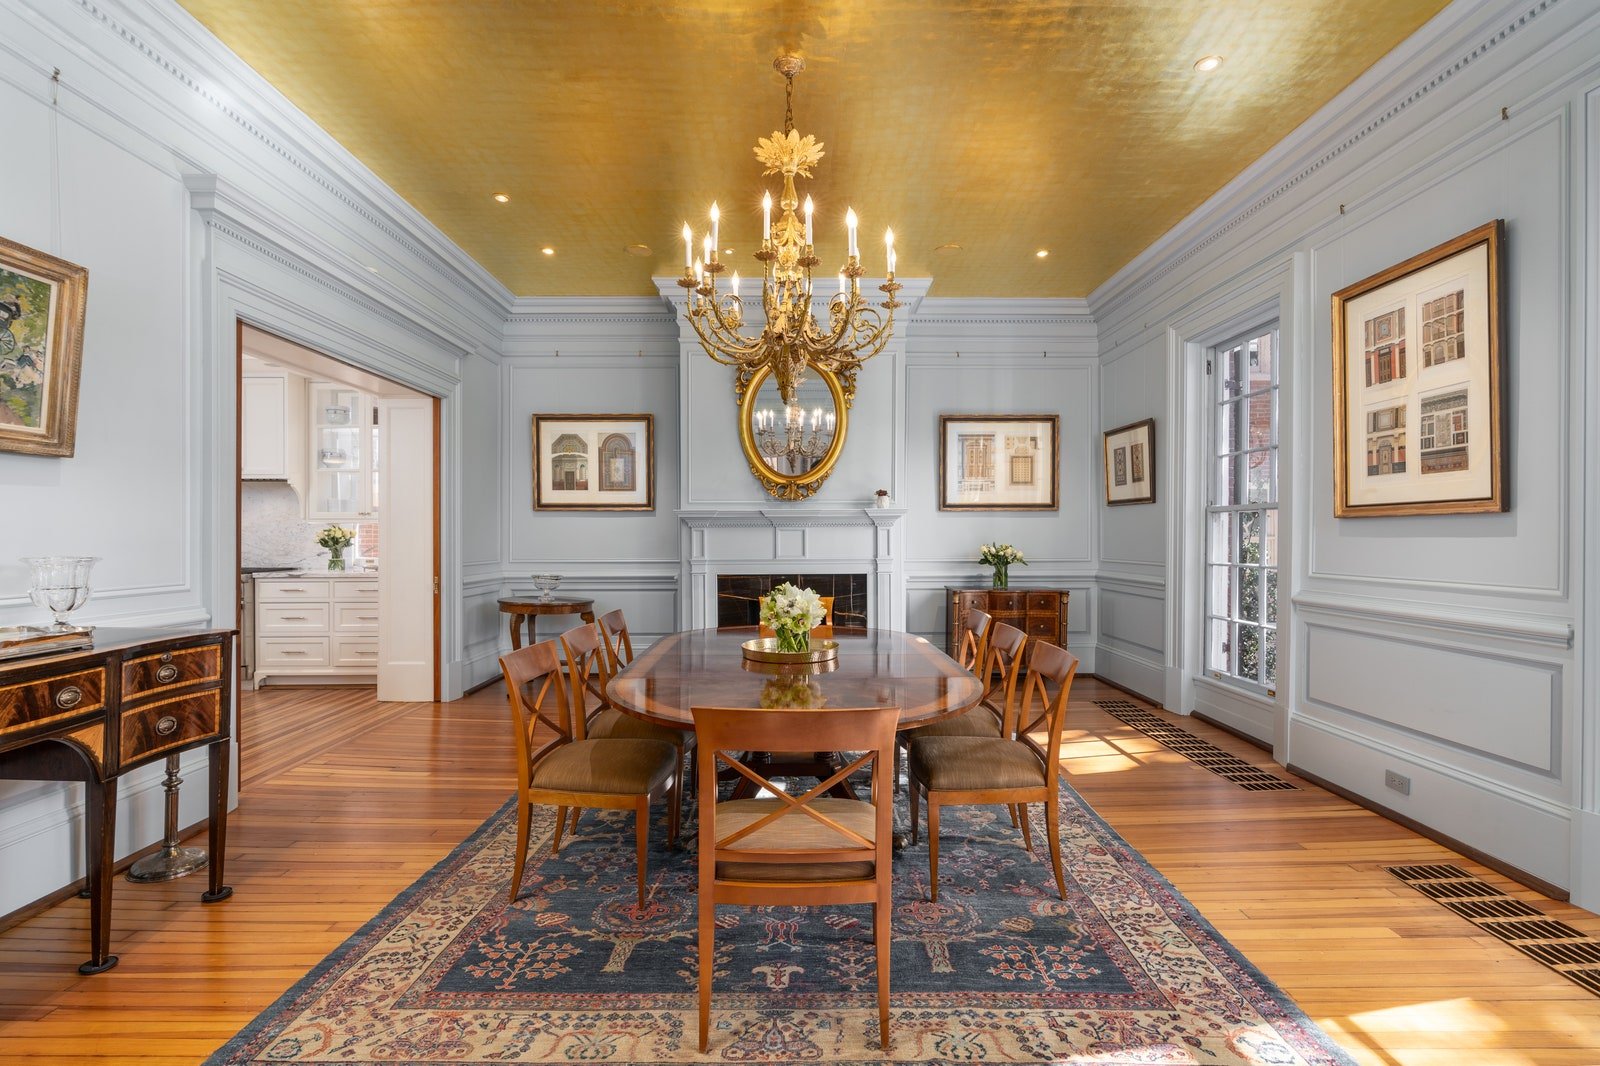 A dining room with traditional furniture light blue walls and gold painted ceiling